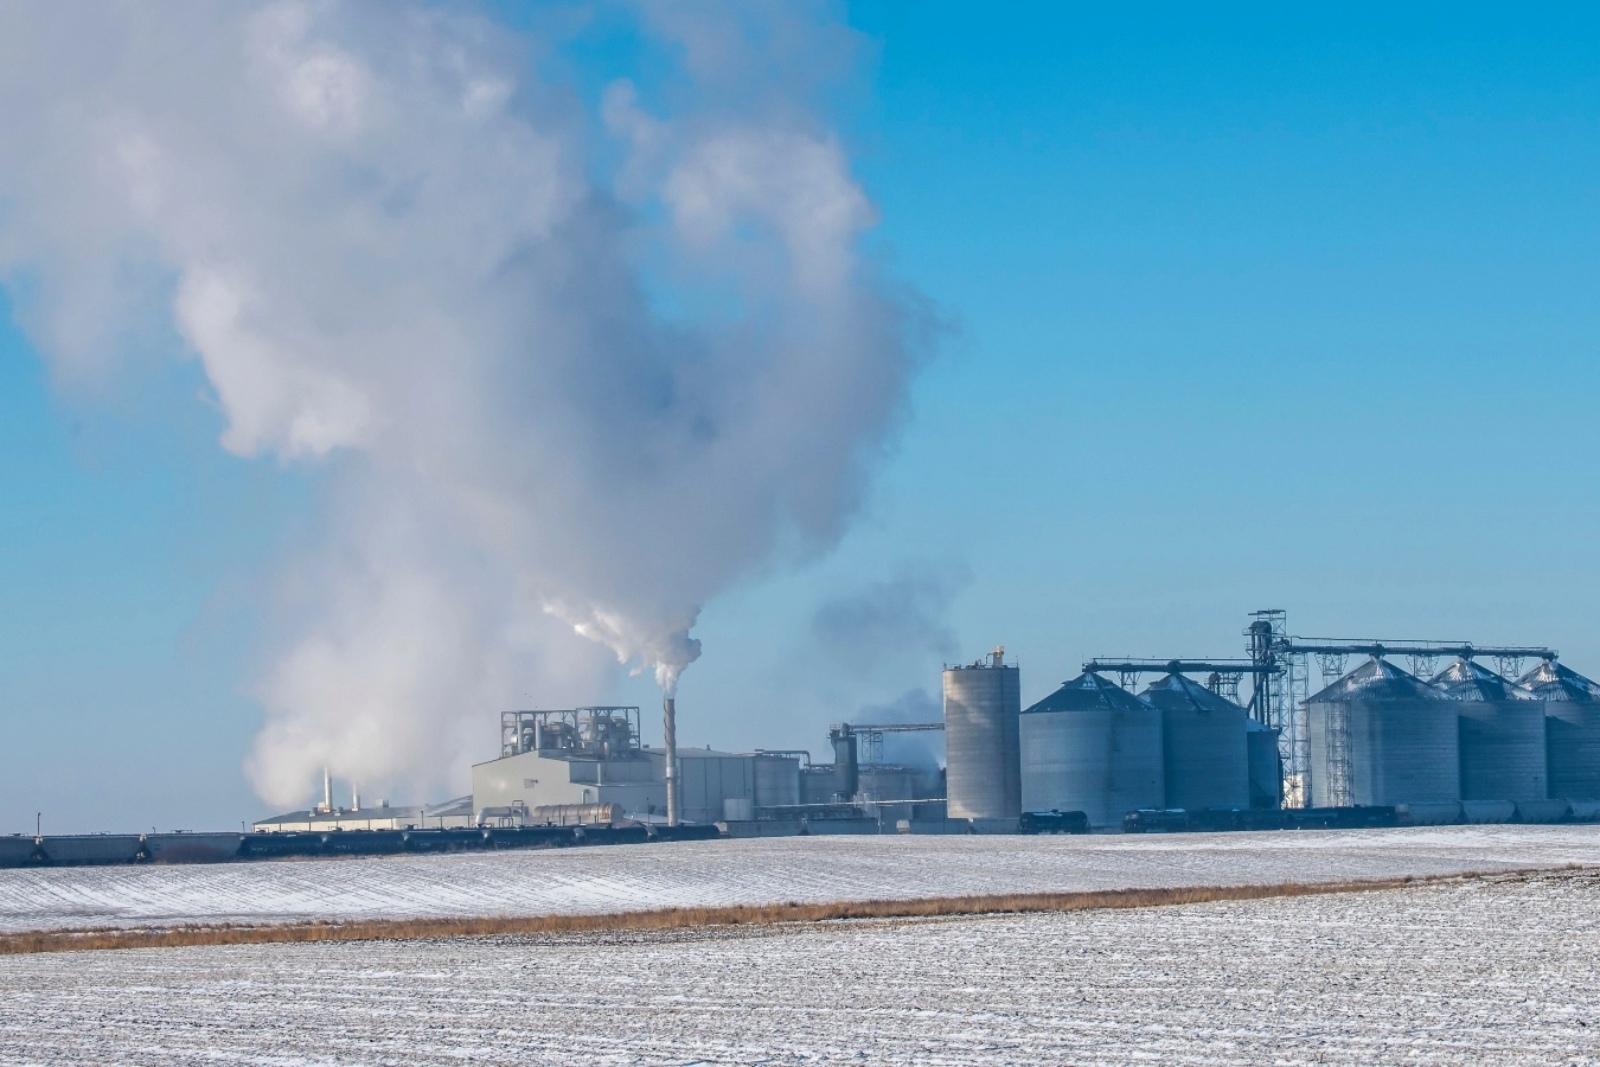 Image of an ethanol plant in Jewell, Iowa spitting out emissions.